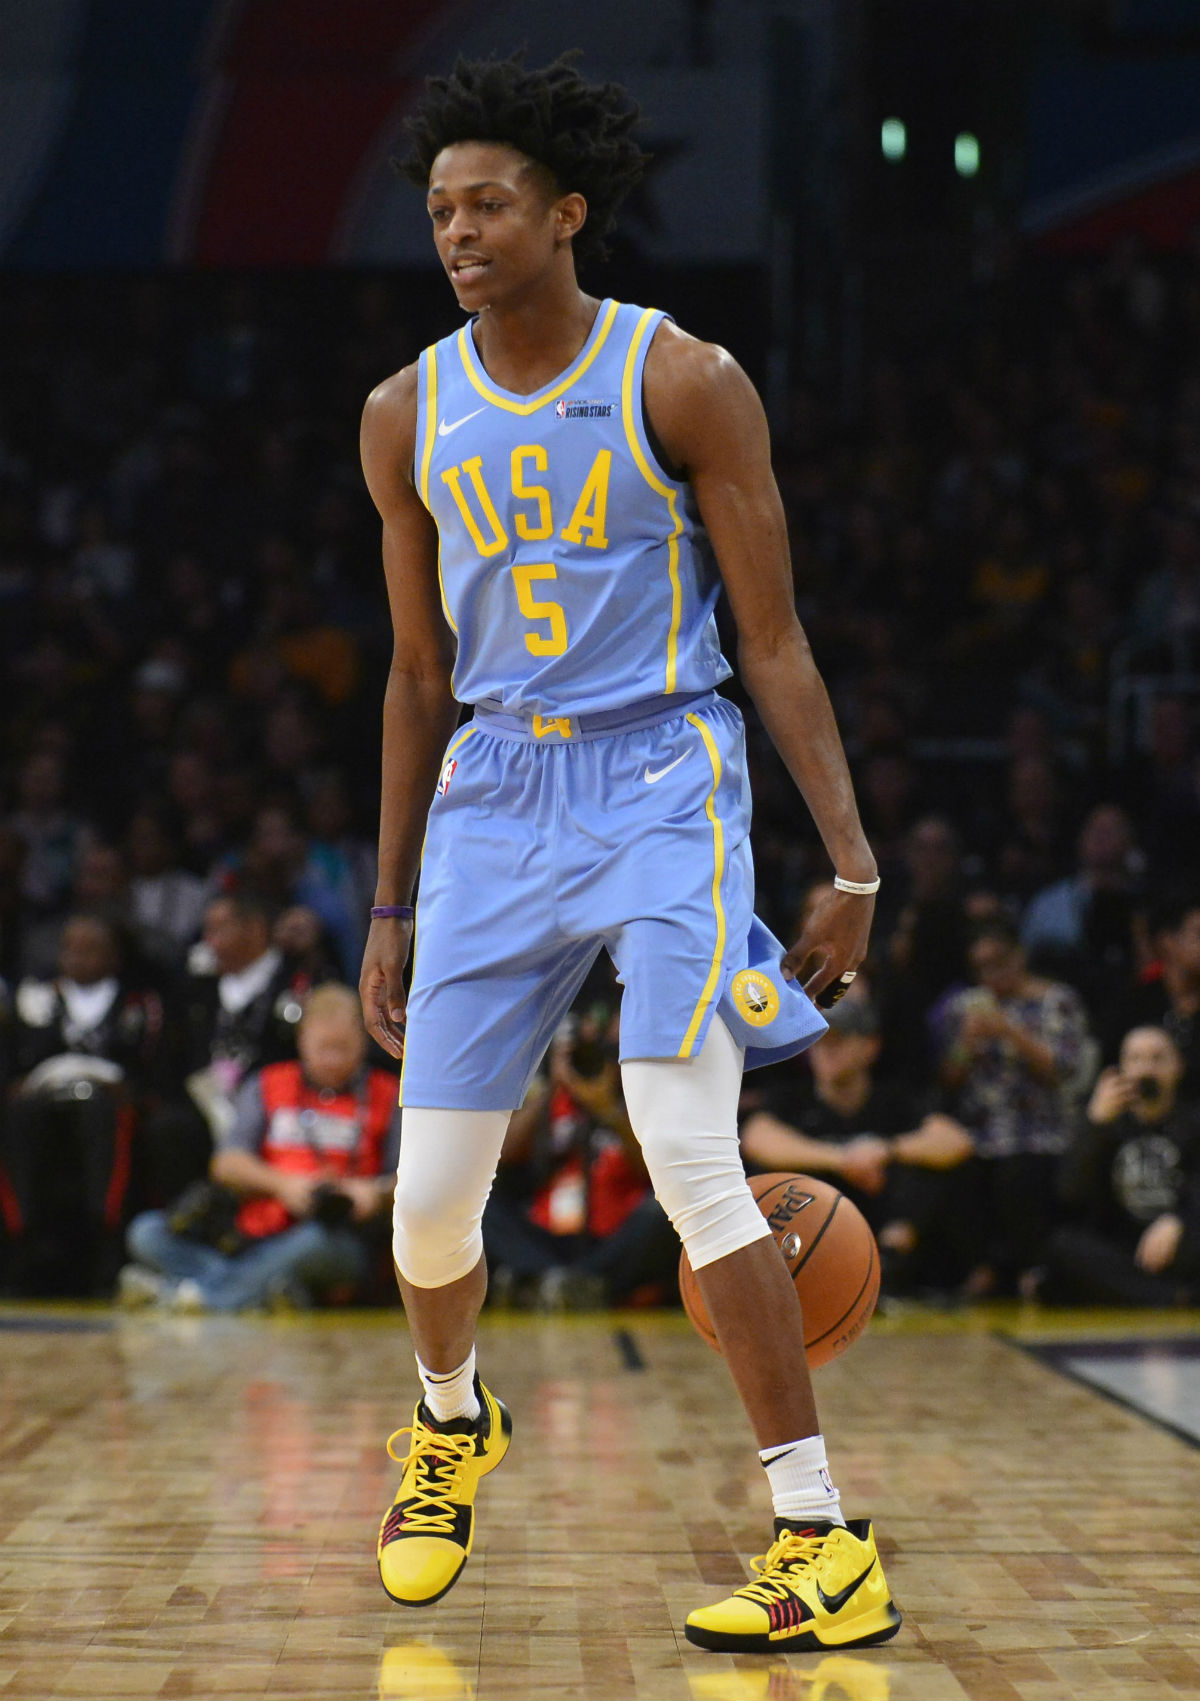 SoleWatch: Every Sneaker Worn in the 2018 NBA Rising Stars Game